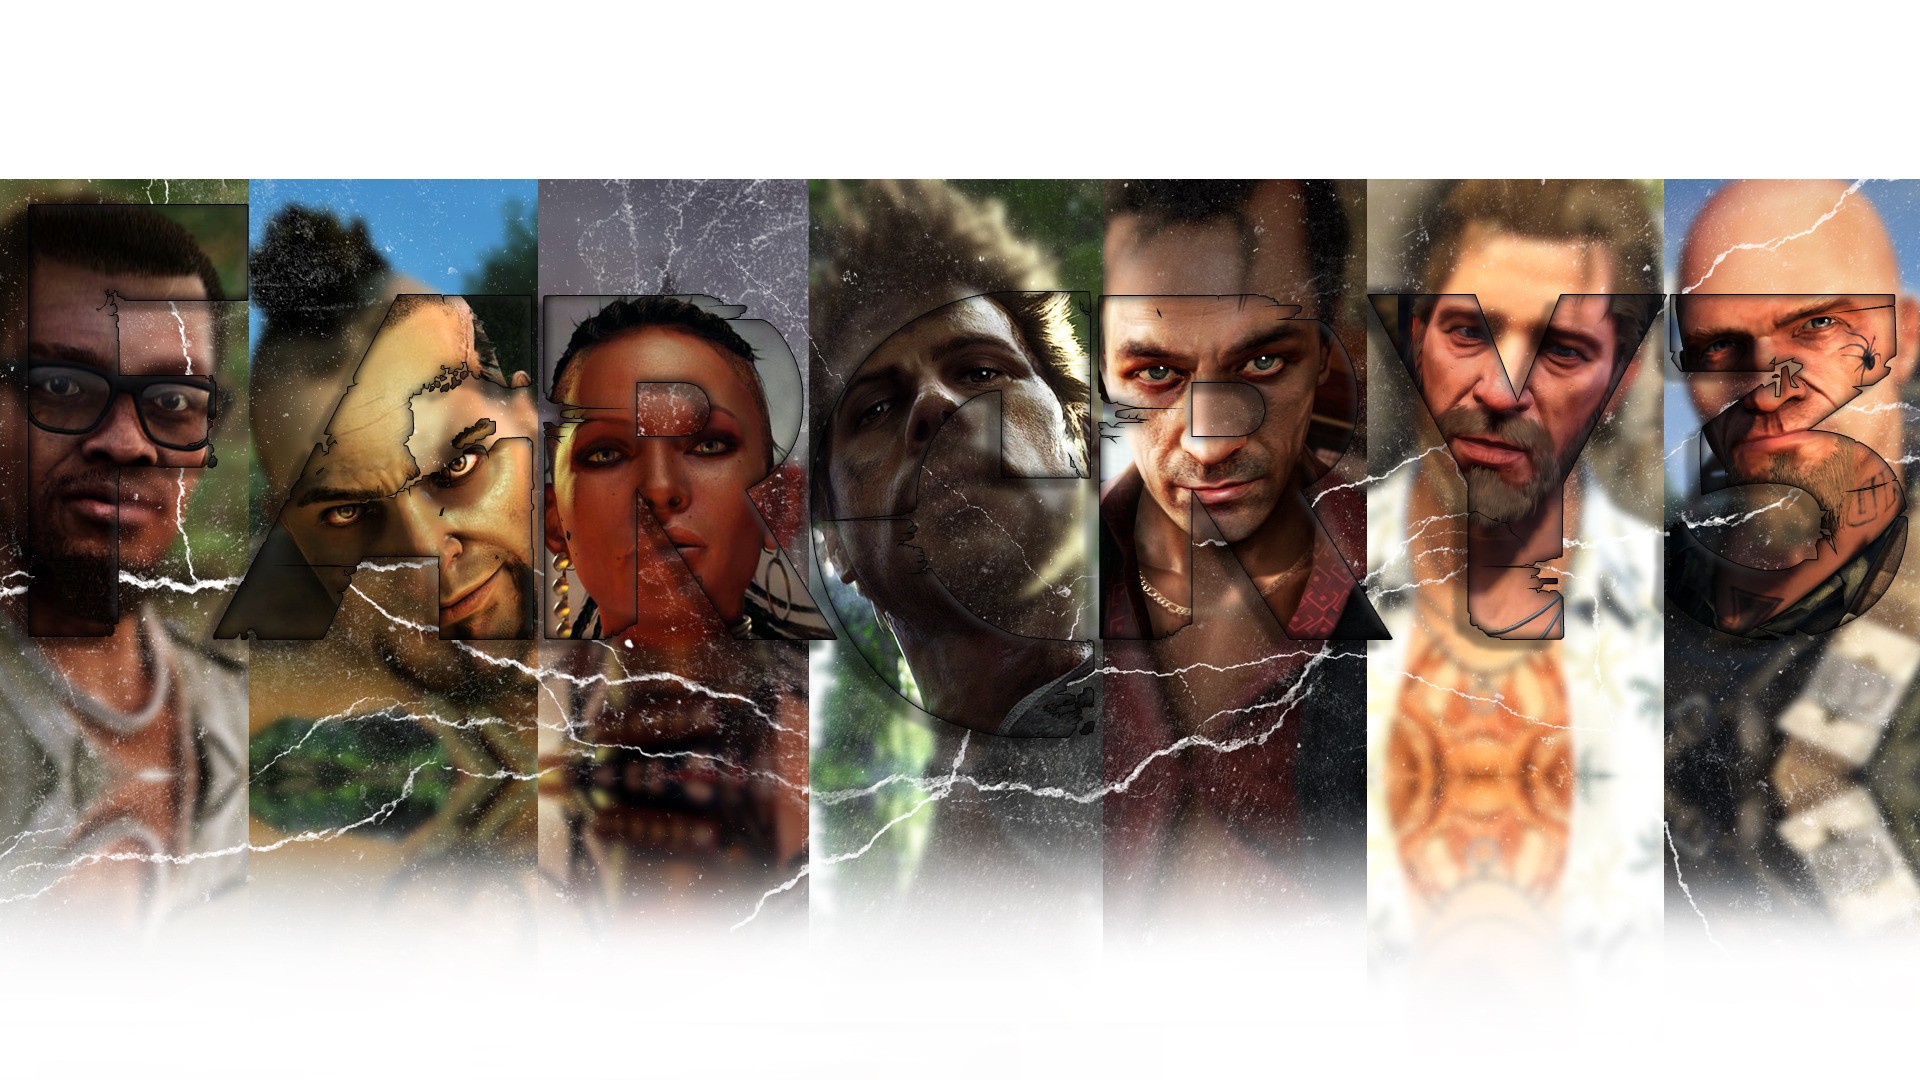 Vaas Montenegro Jason Brody Buck Video Game Characters Face Far Cry 3 Video Games 2012 Year Collage 1920x1080